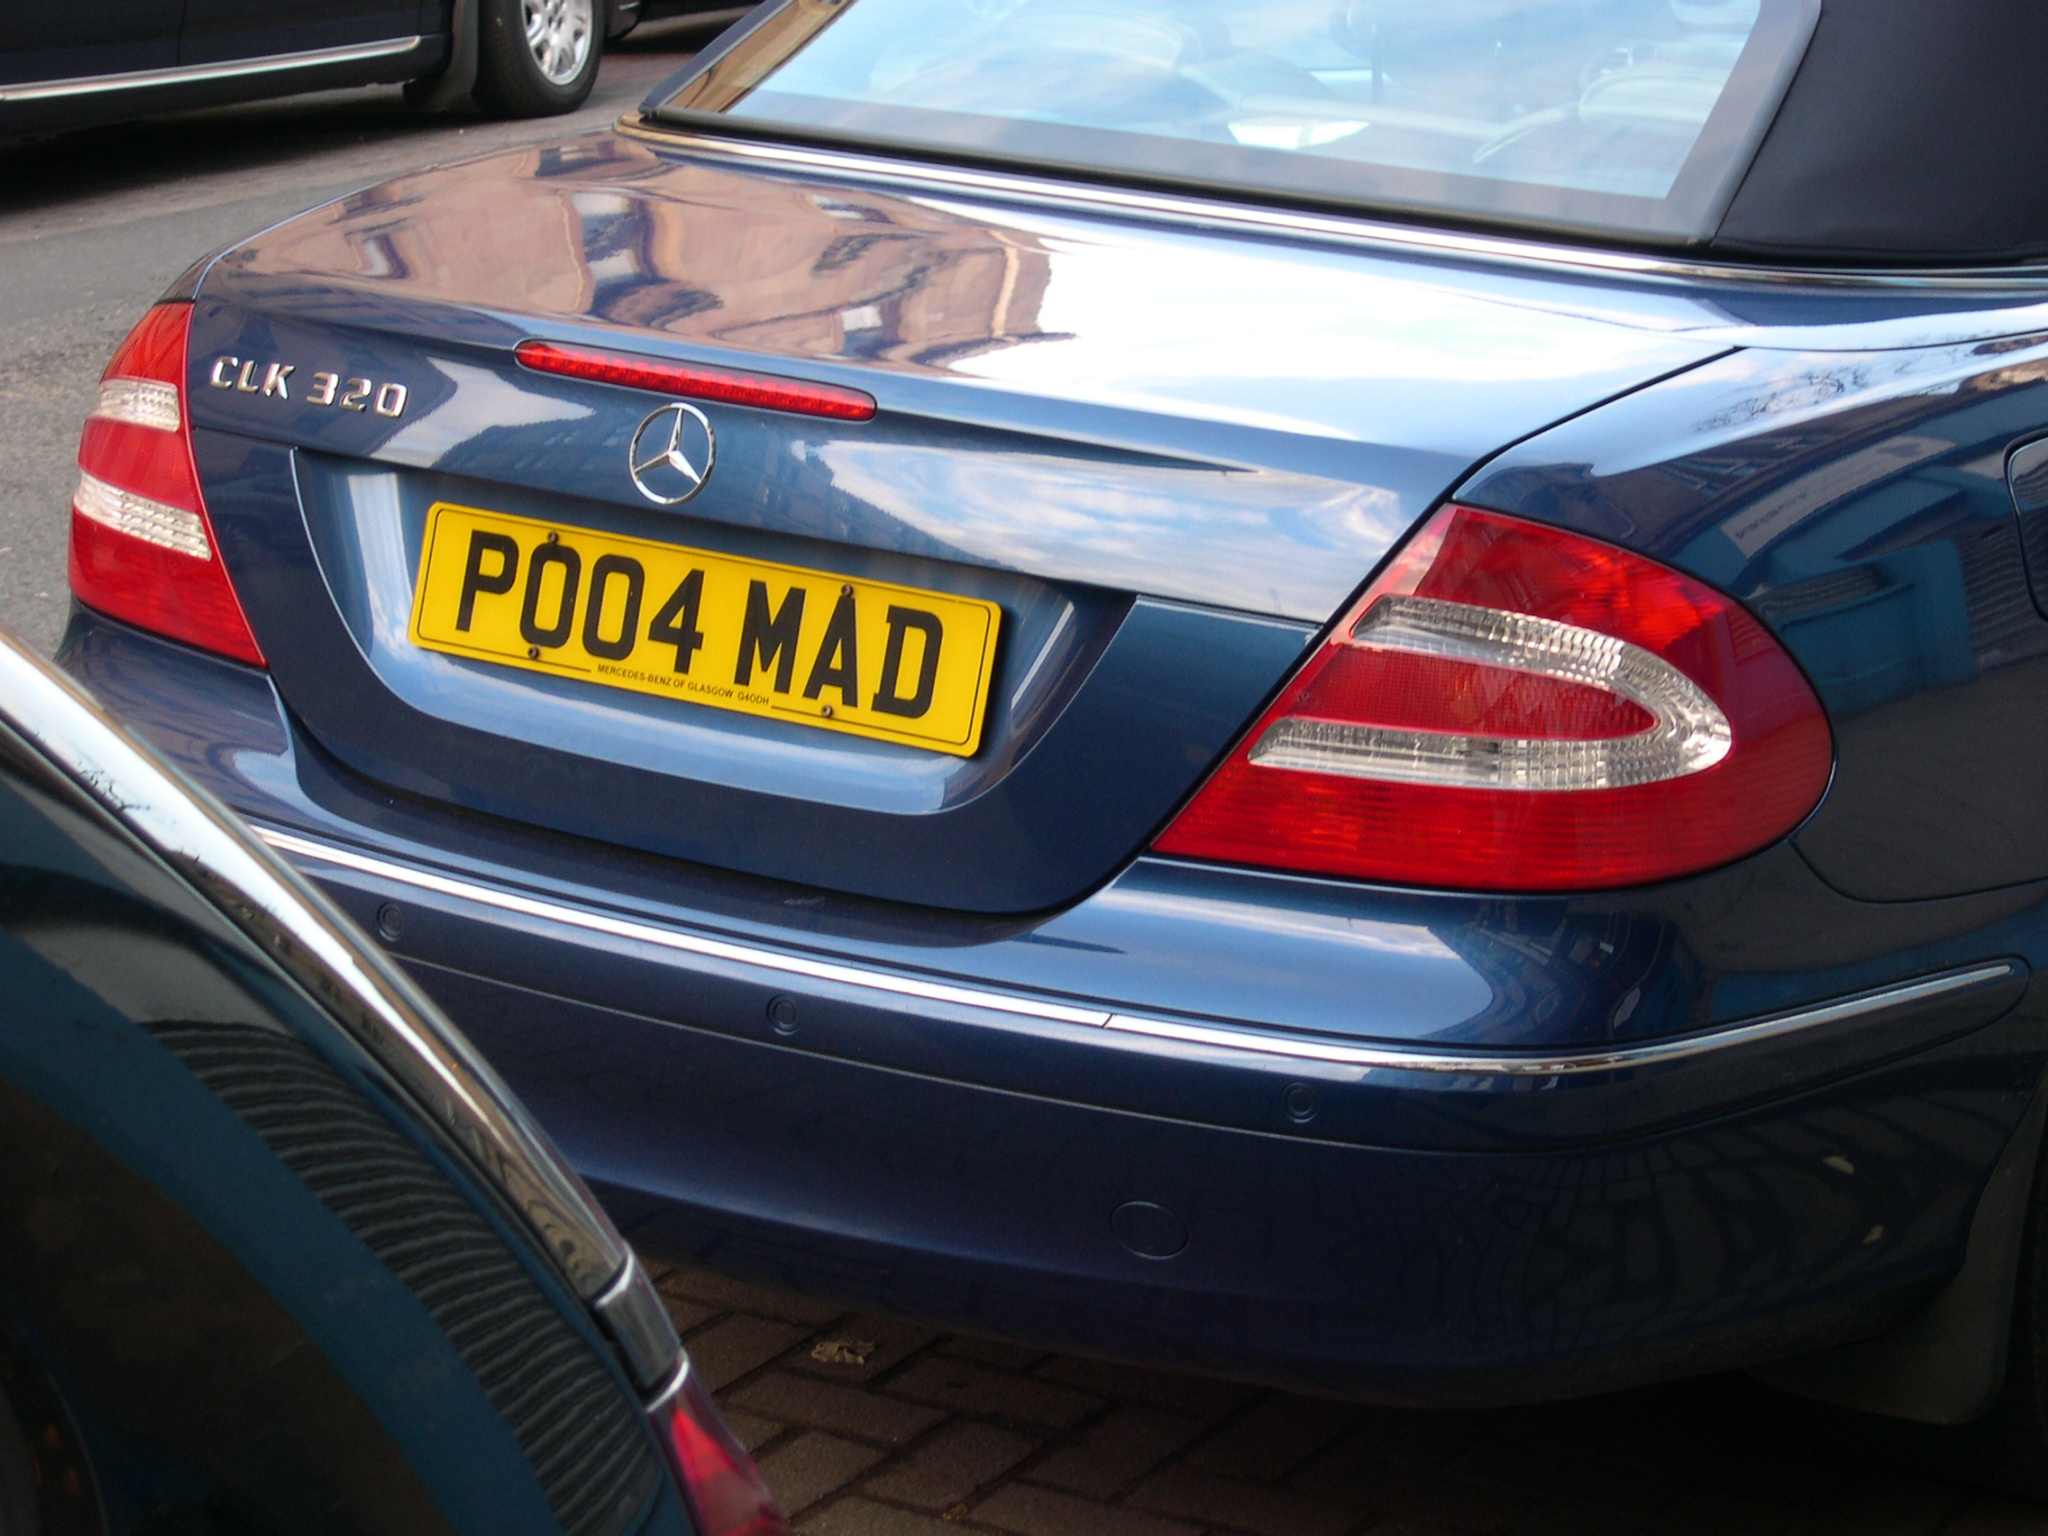 7 Seriously Funny Number Plates